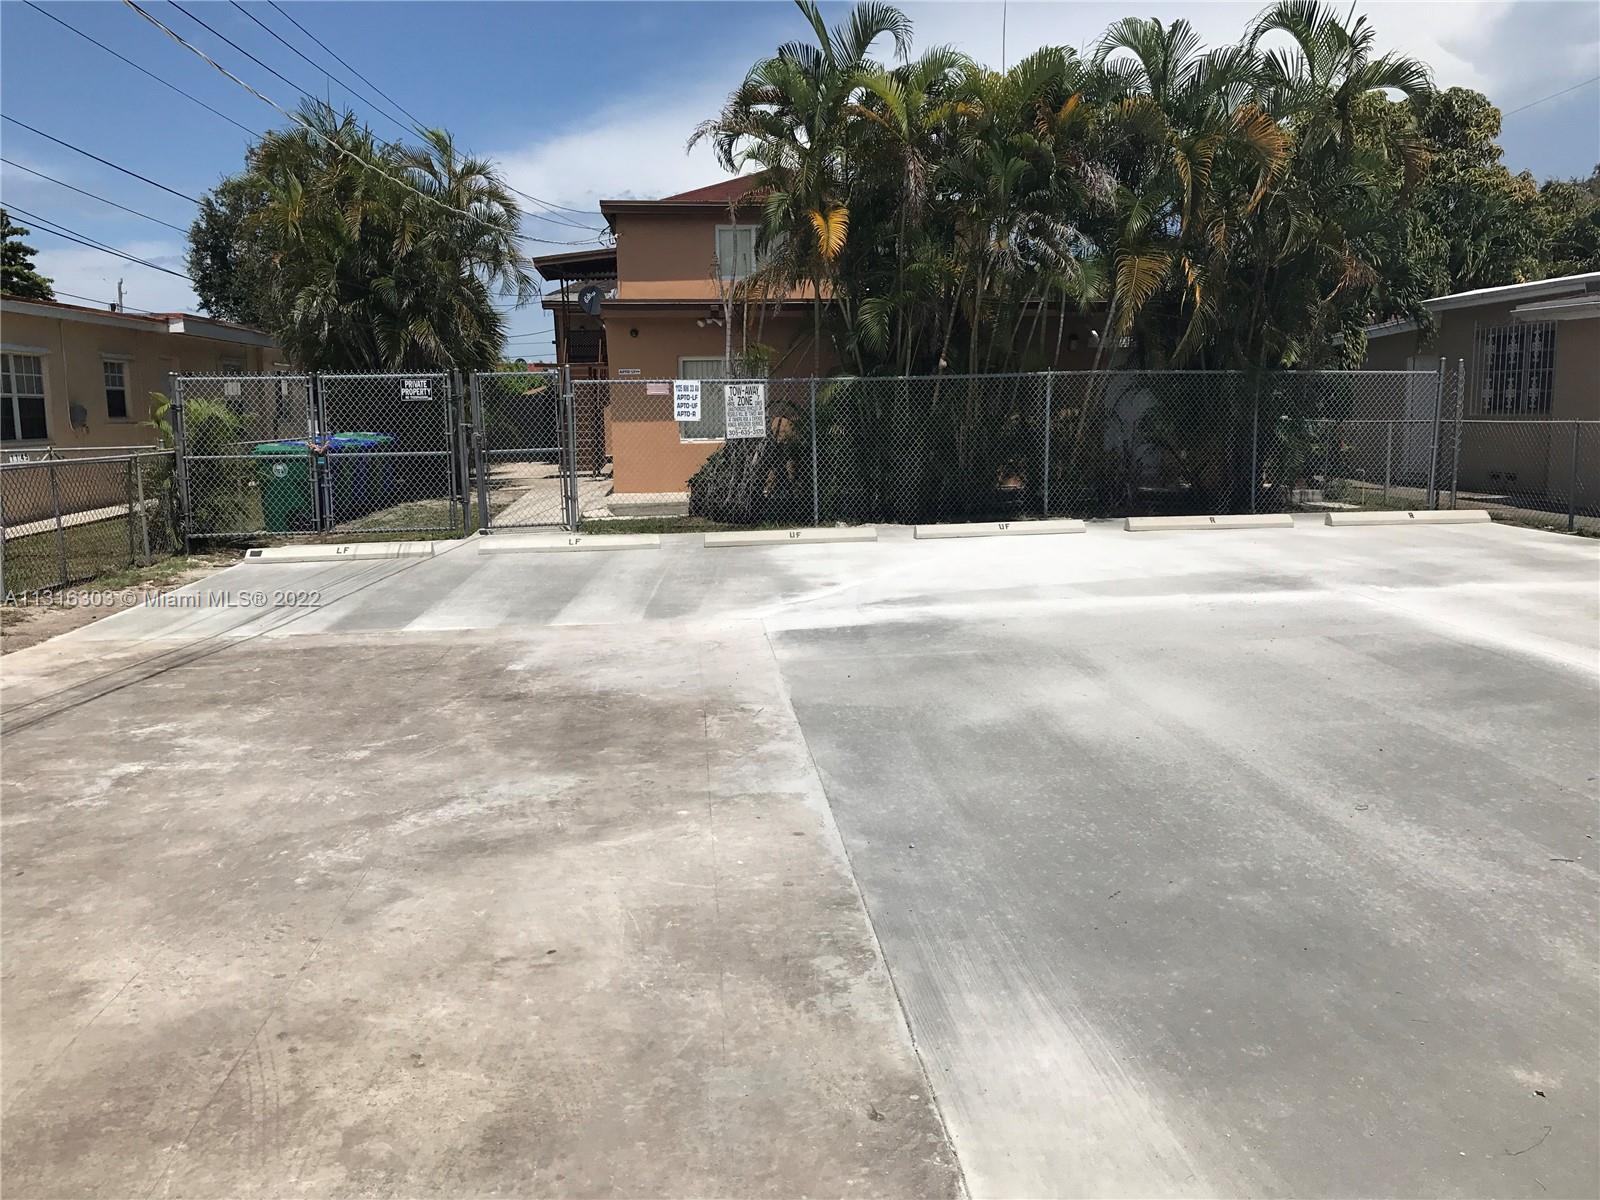 2920 NW 5th Ave Miami, FL 33127 - Office Property for on